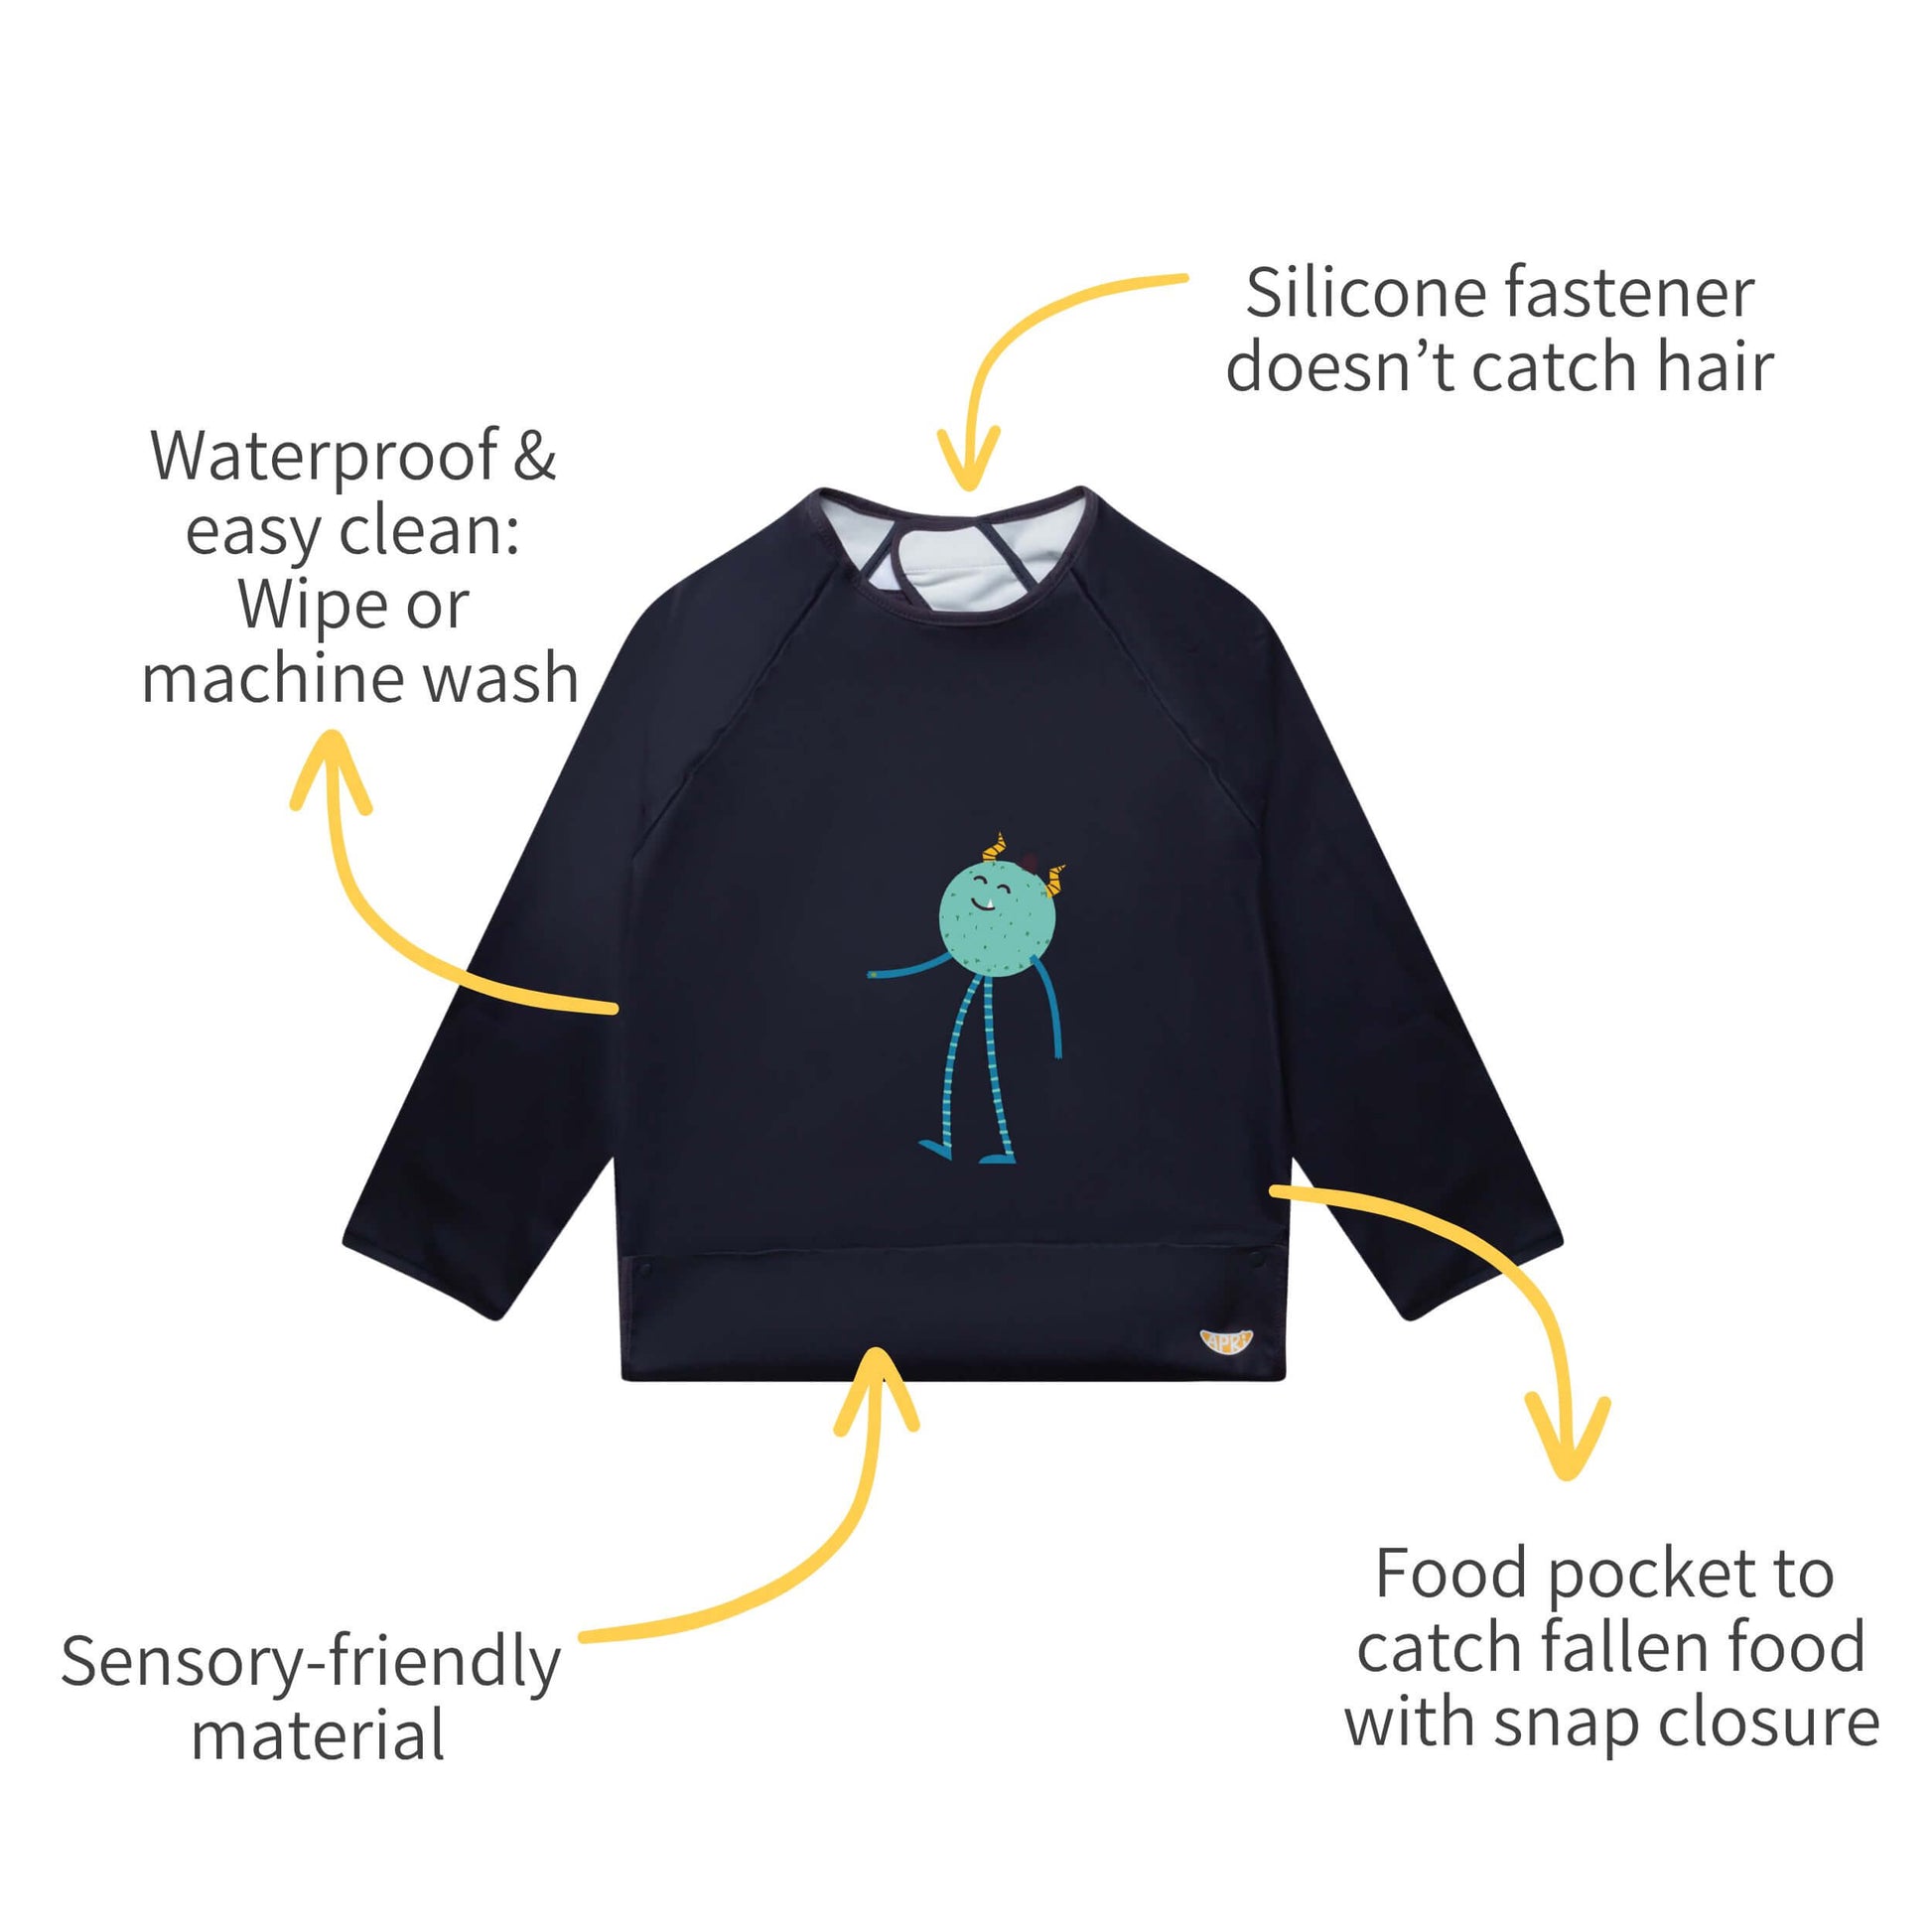 Apri waterproof bib with soft material provides a comfortable dining experience for kids with sensory sensitivities